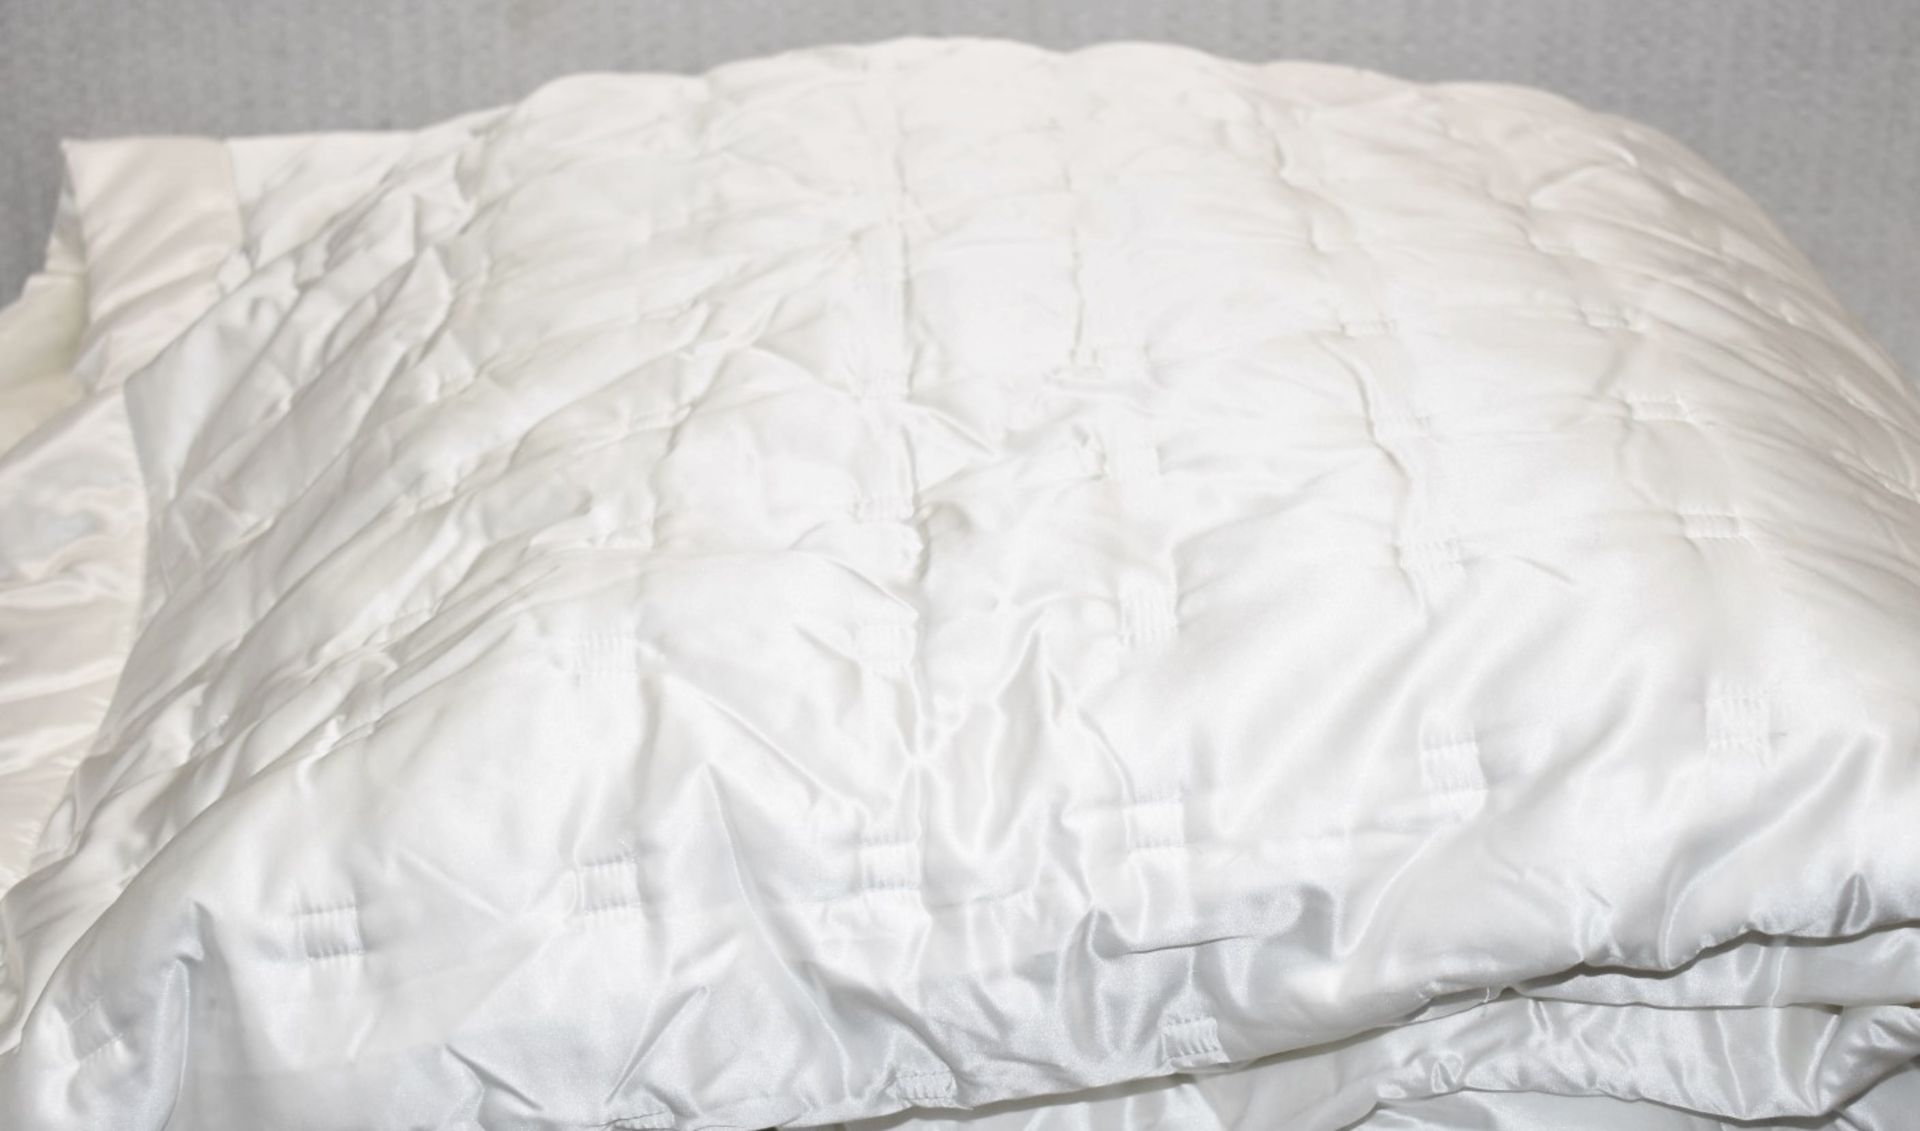 1 x GINGERLILY 'Windsor' Luxury Mulberry Silk Double Bedspread, in Ivory 240cm x 240cm - RRP £655.00 - Image 2 of 6